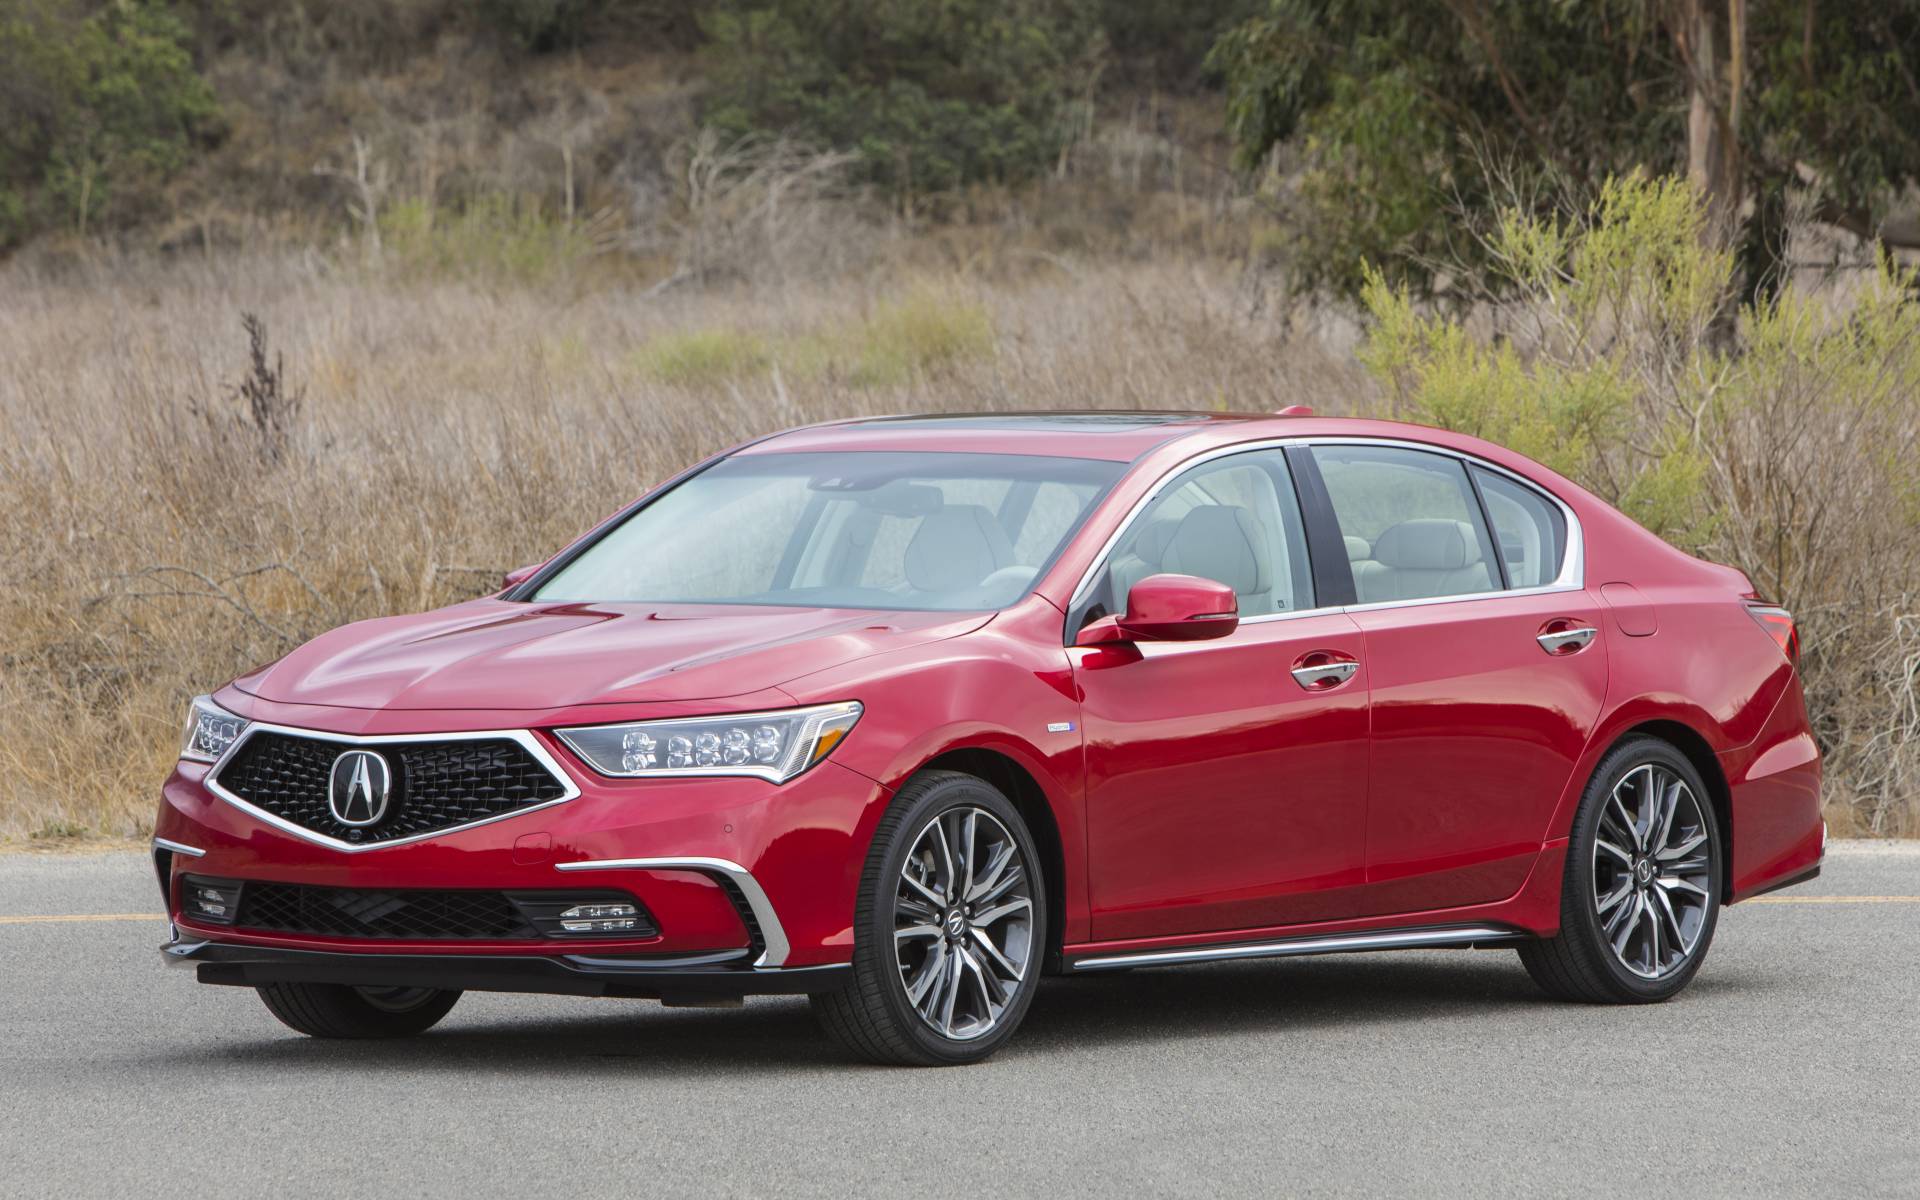 Acura Rlx News Reviews Picture Galleries And Videos The Car Guide